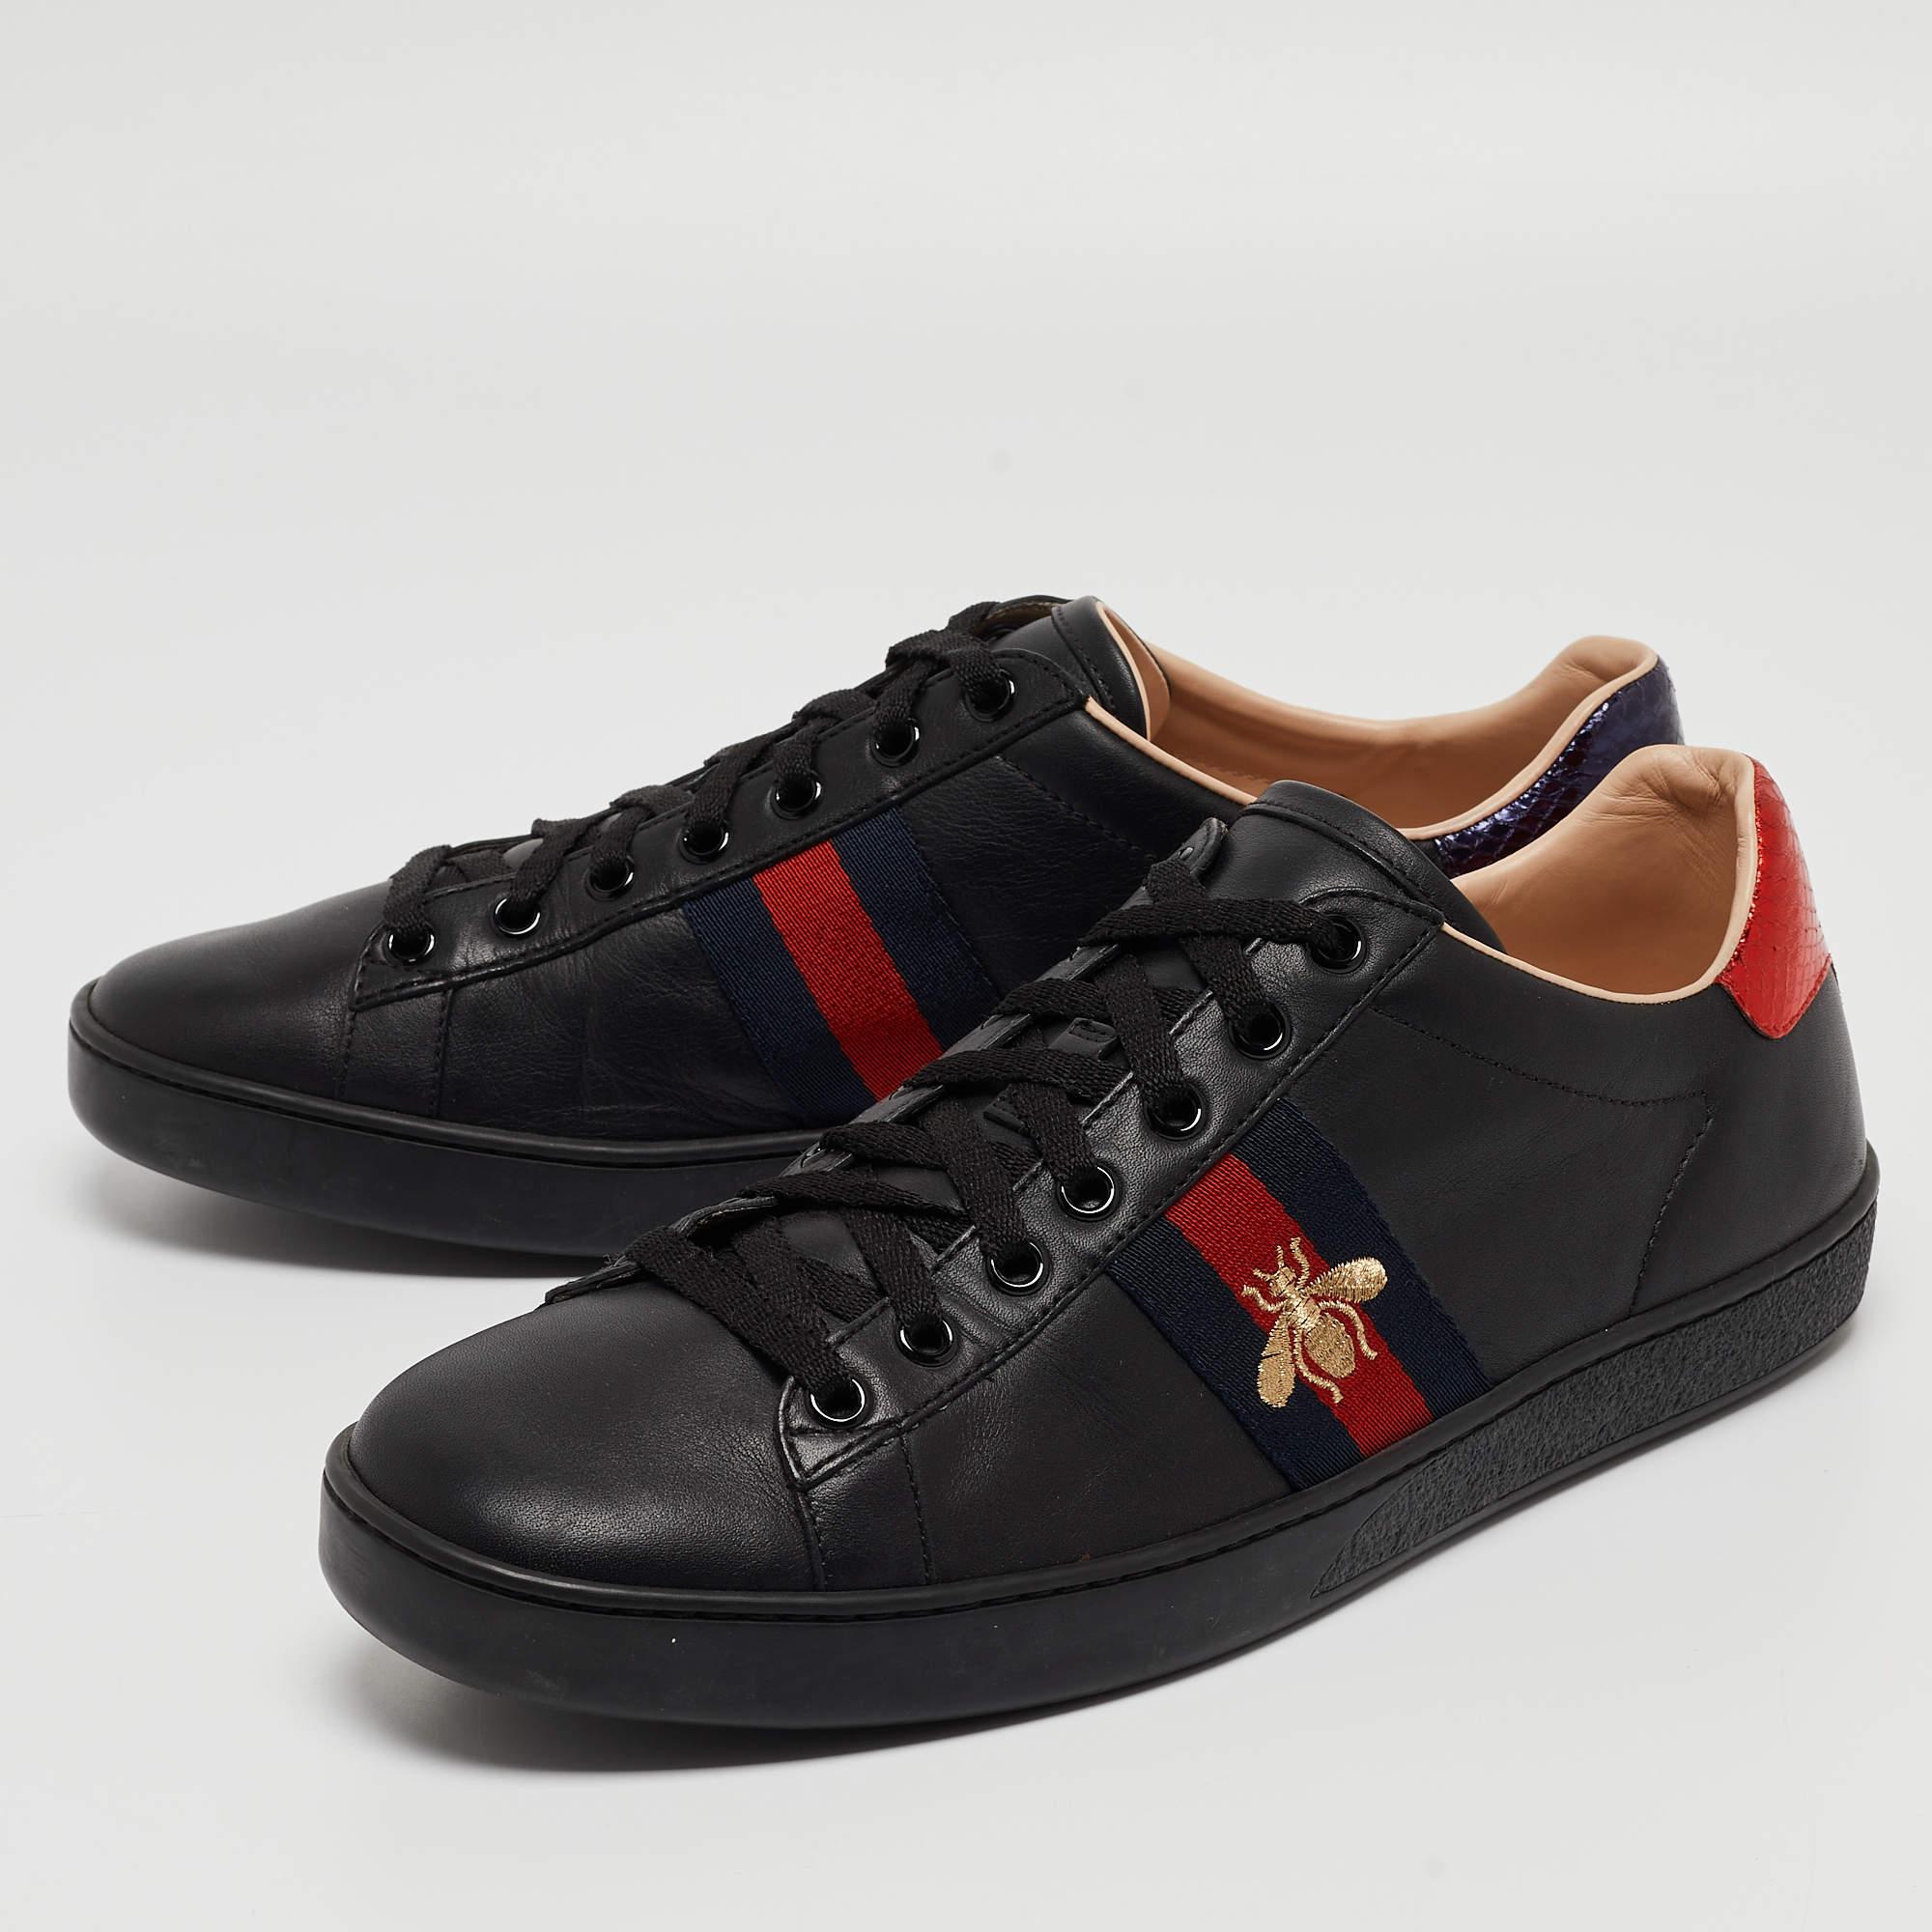 Gucci Black Leather Ace Web Bee Low Top Sneakers Size 39.5 In Excellent Condition For Sale In Dubai, Al Qouz 2